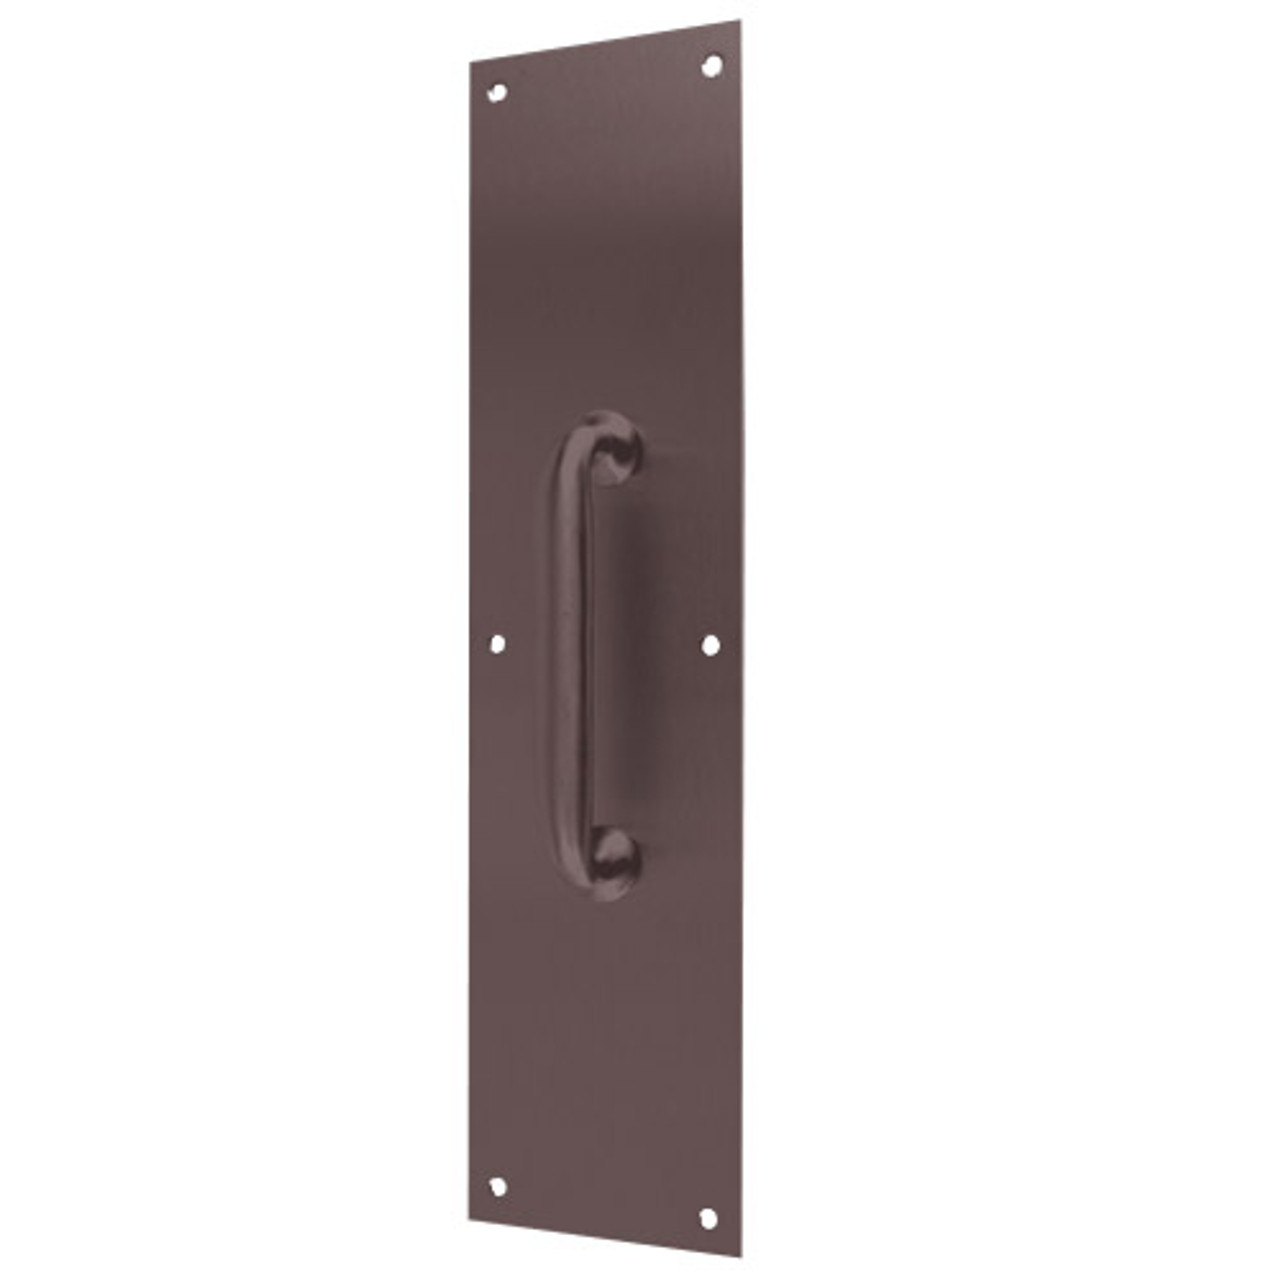 7110-613 Don Jo Pull Plates with Cast Pull in Oil Rubbed Bronze Finish